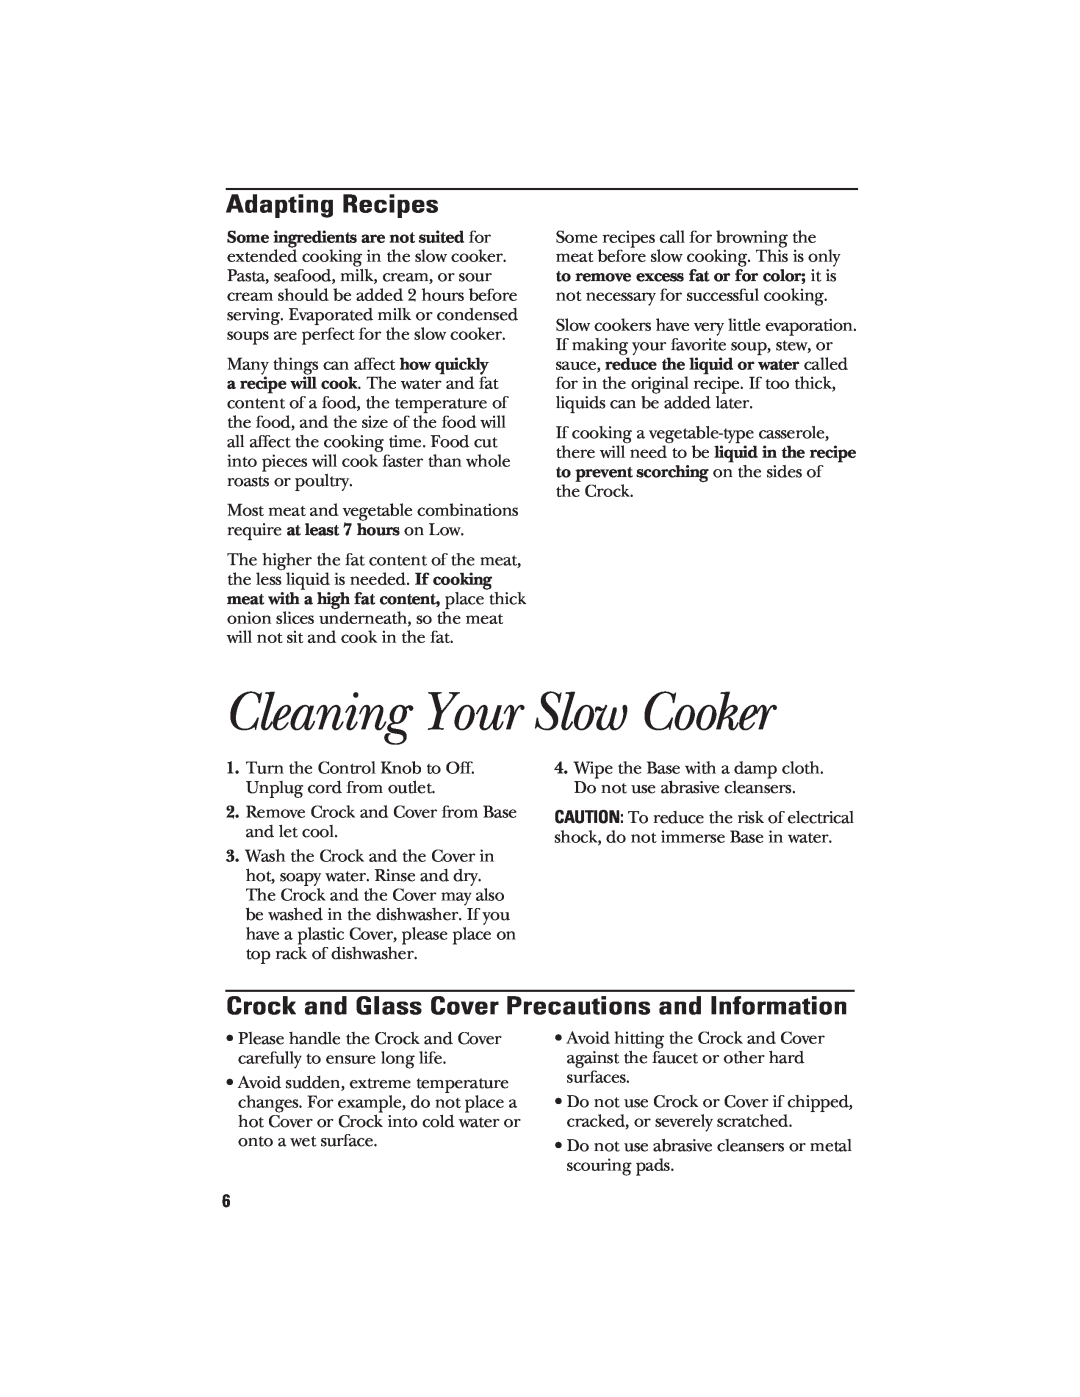 GE 840070700 manual Cleaning Your Slow Cooker, Adapting Recipes, Crock and Glass Cover Precautions and Information 